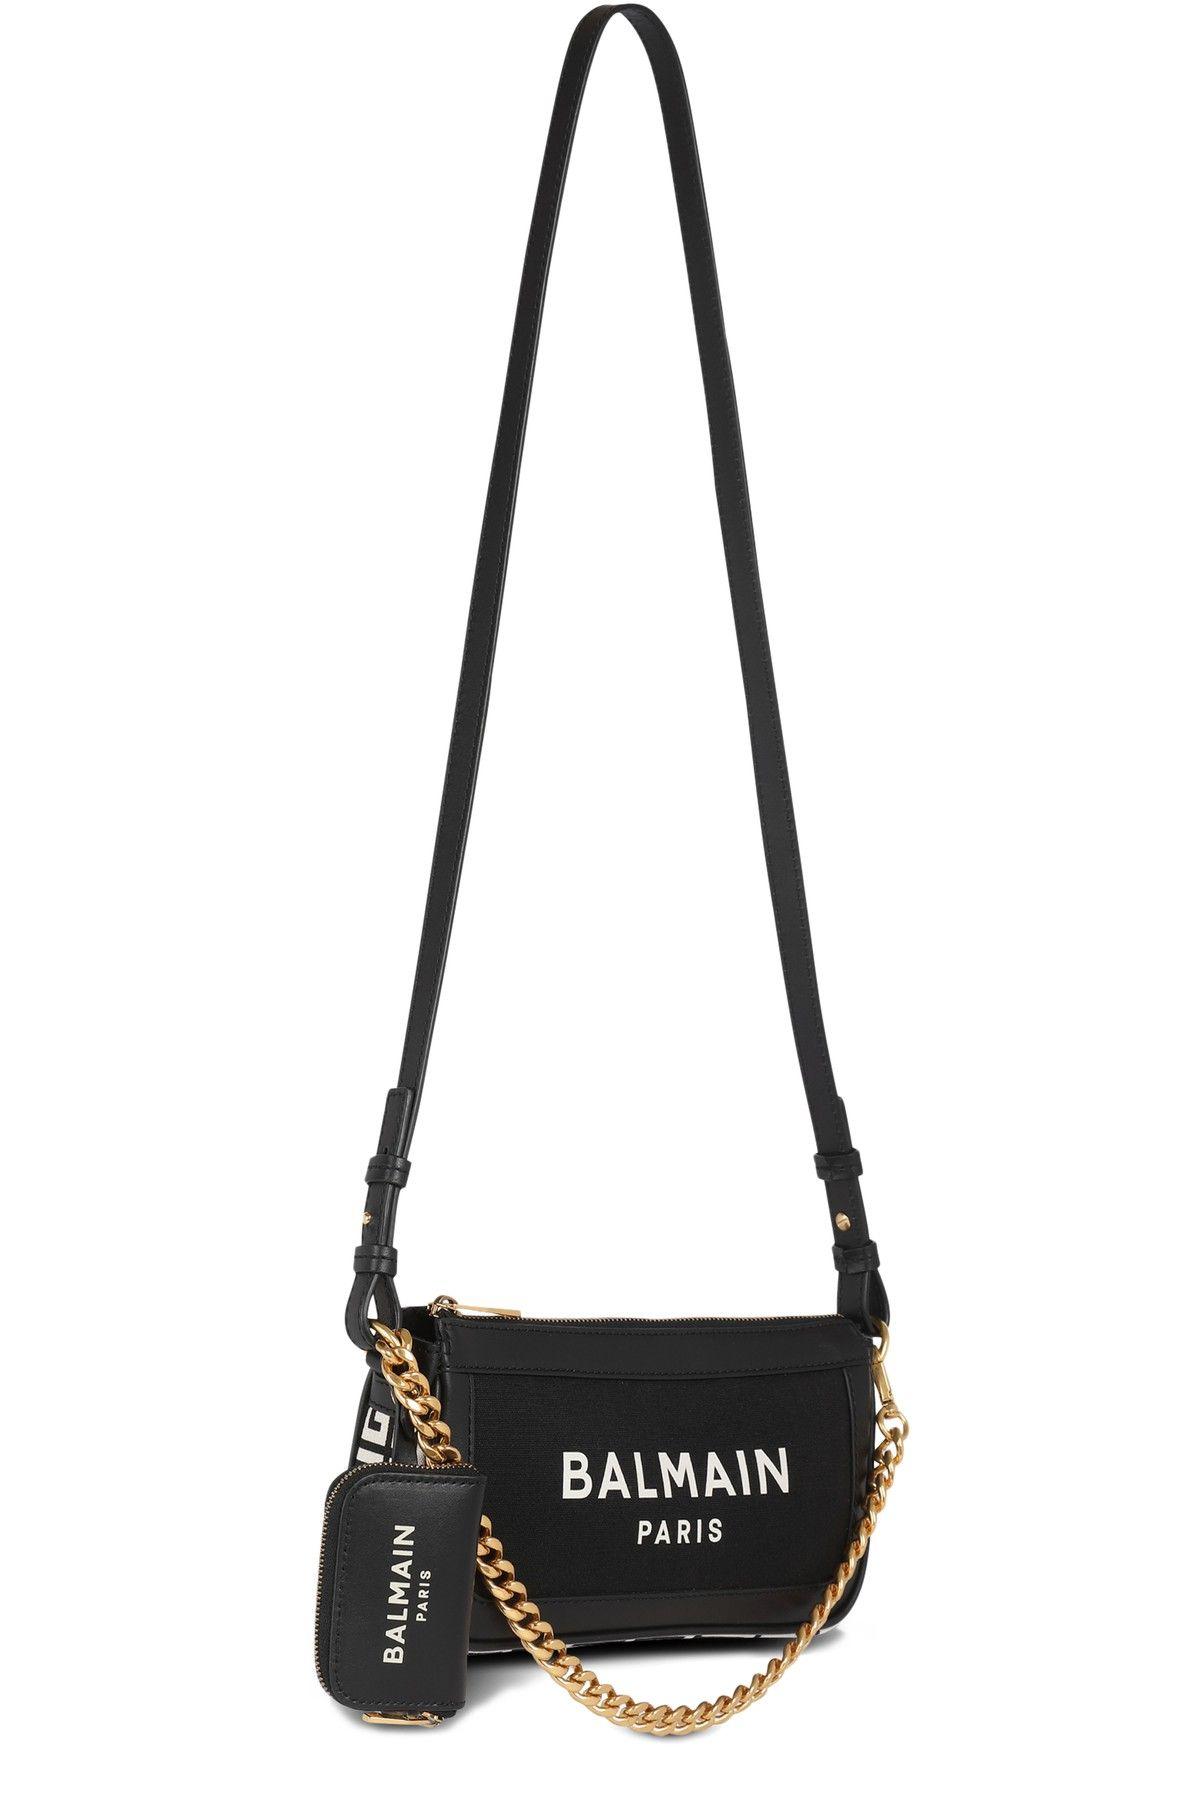 Balmain B-army Canvas Clutch Bag With Leather Inserts in Black | Lyst